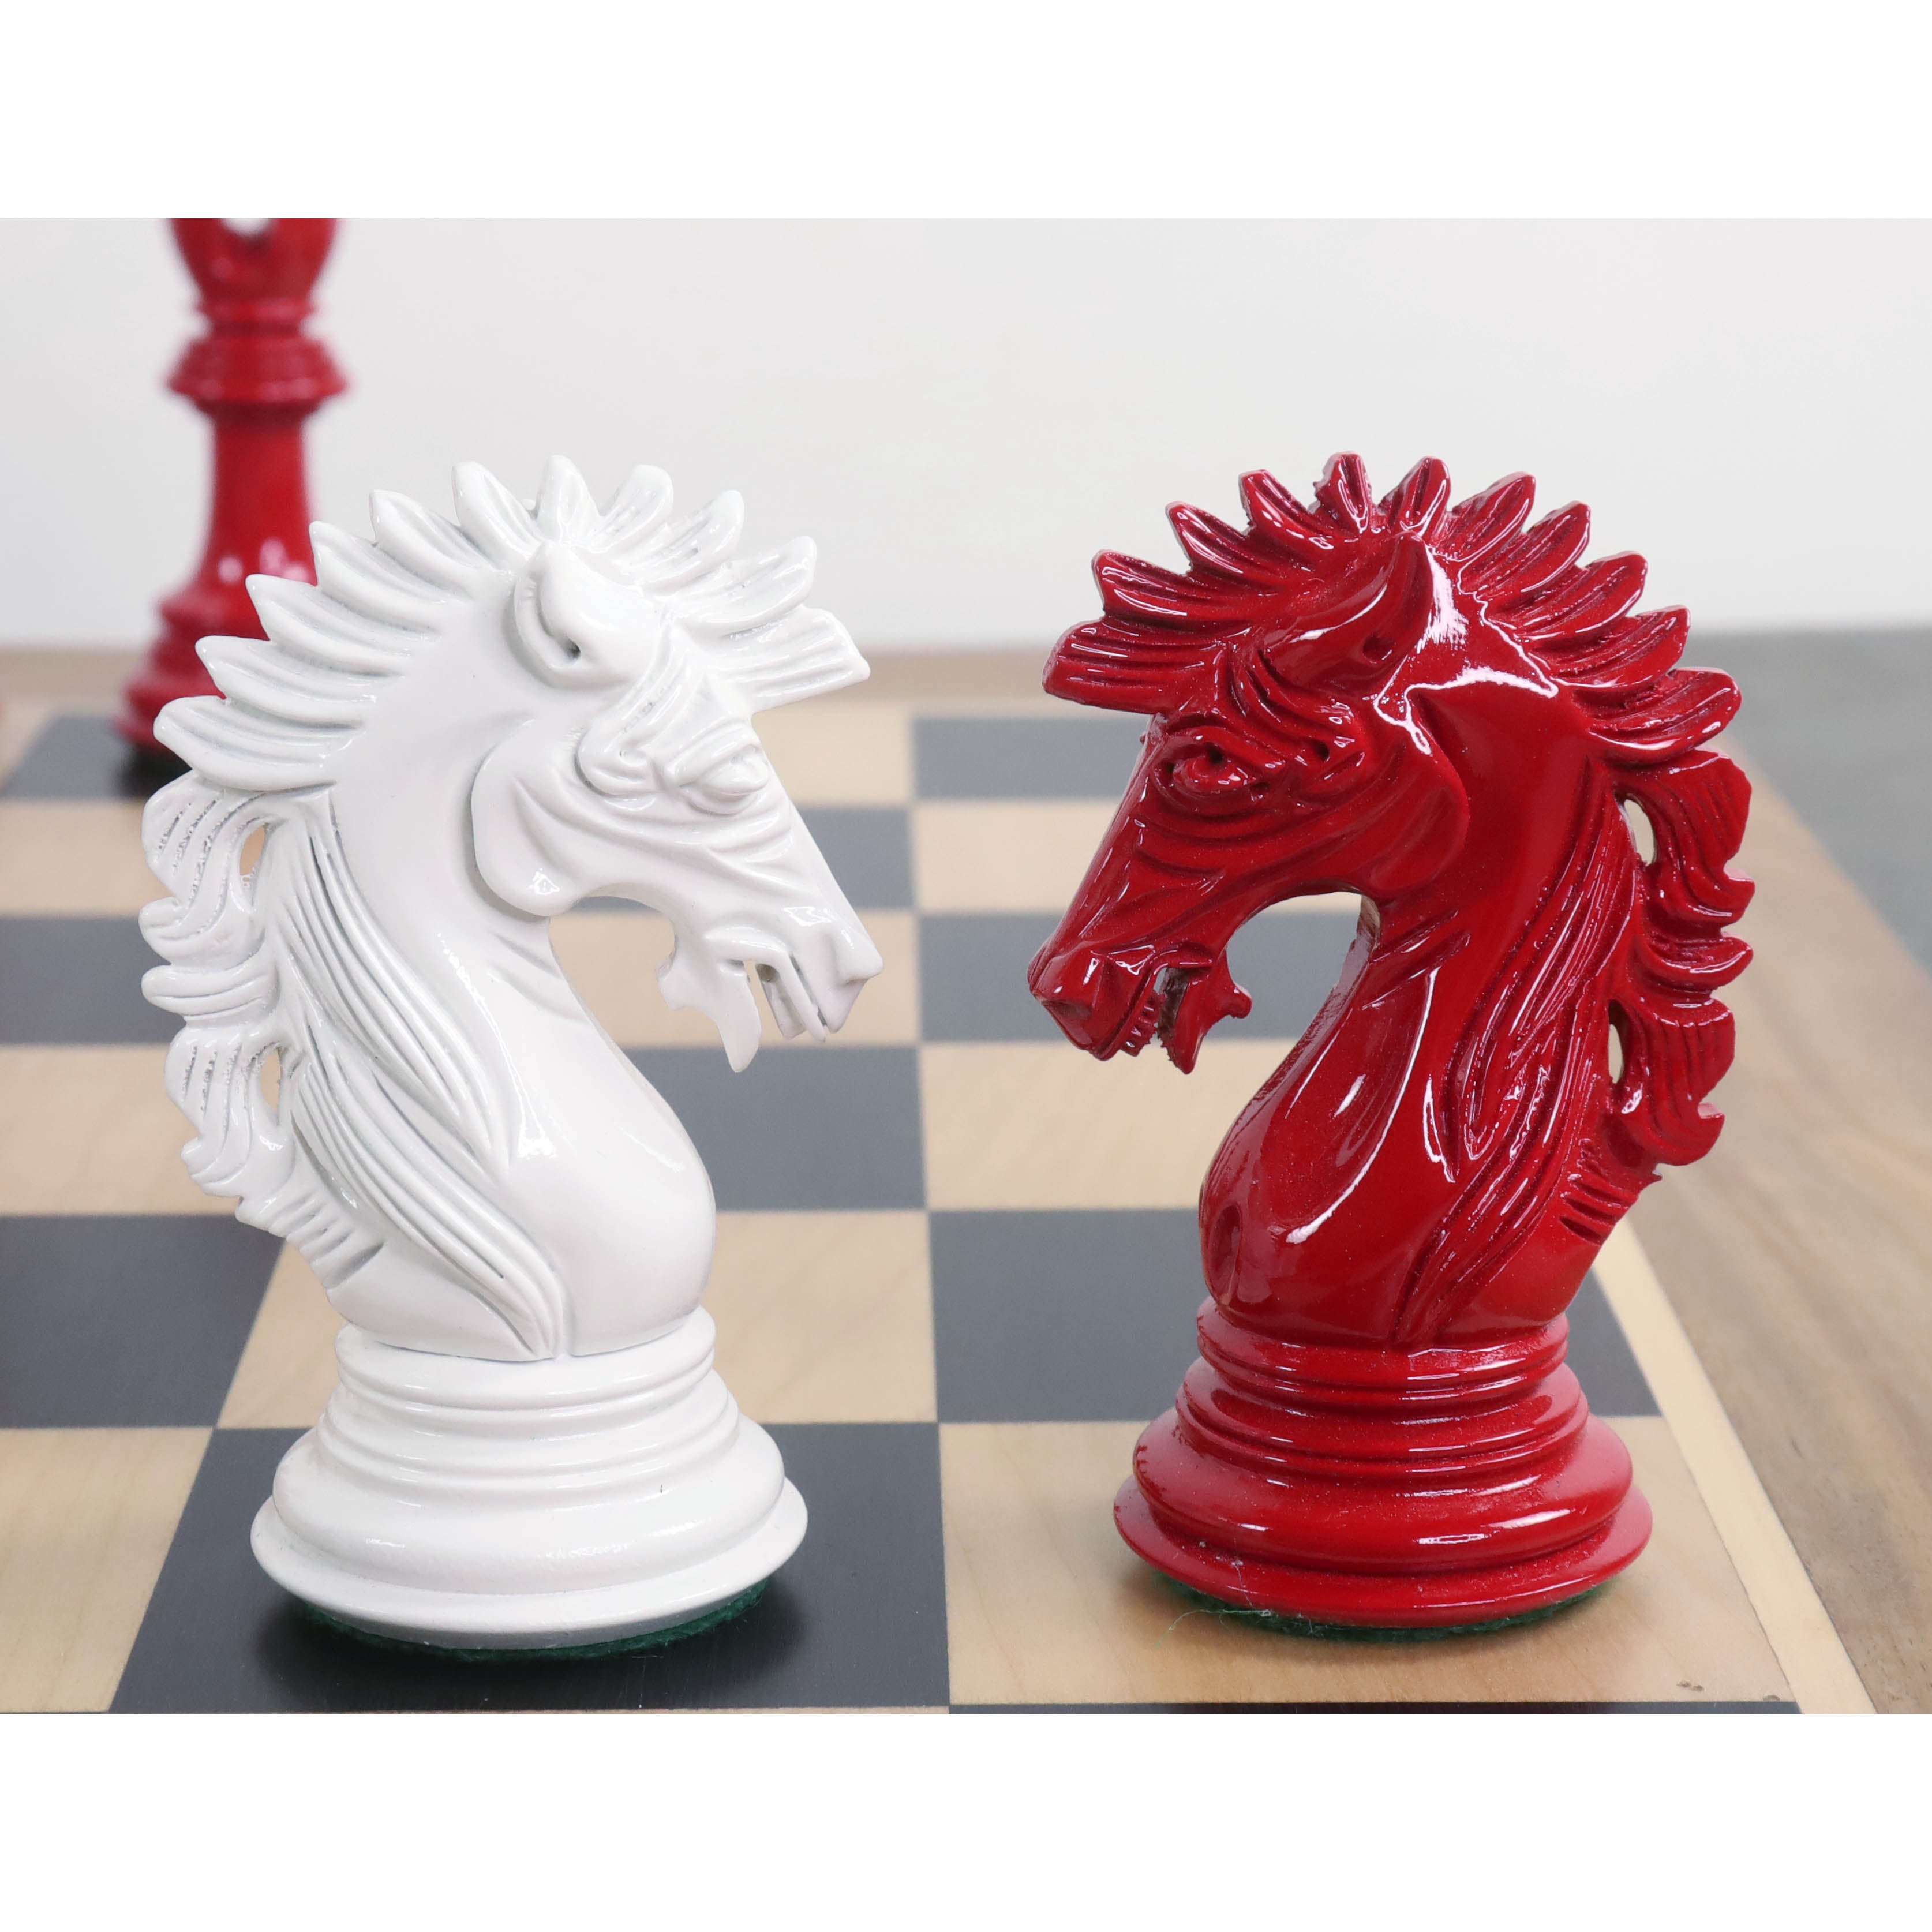 4.6" Mogul Staunton Luxury Chess Set- Chess Pieces Only - White & Red Lacquered Boxwood